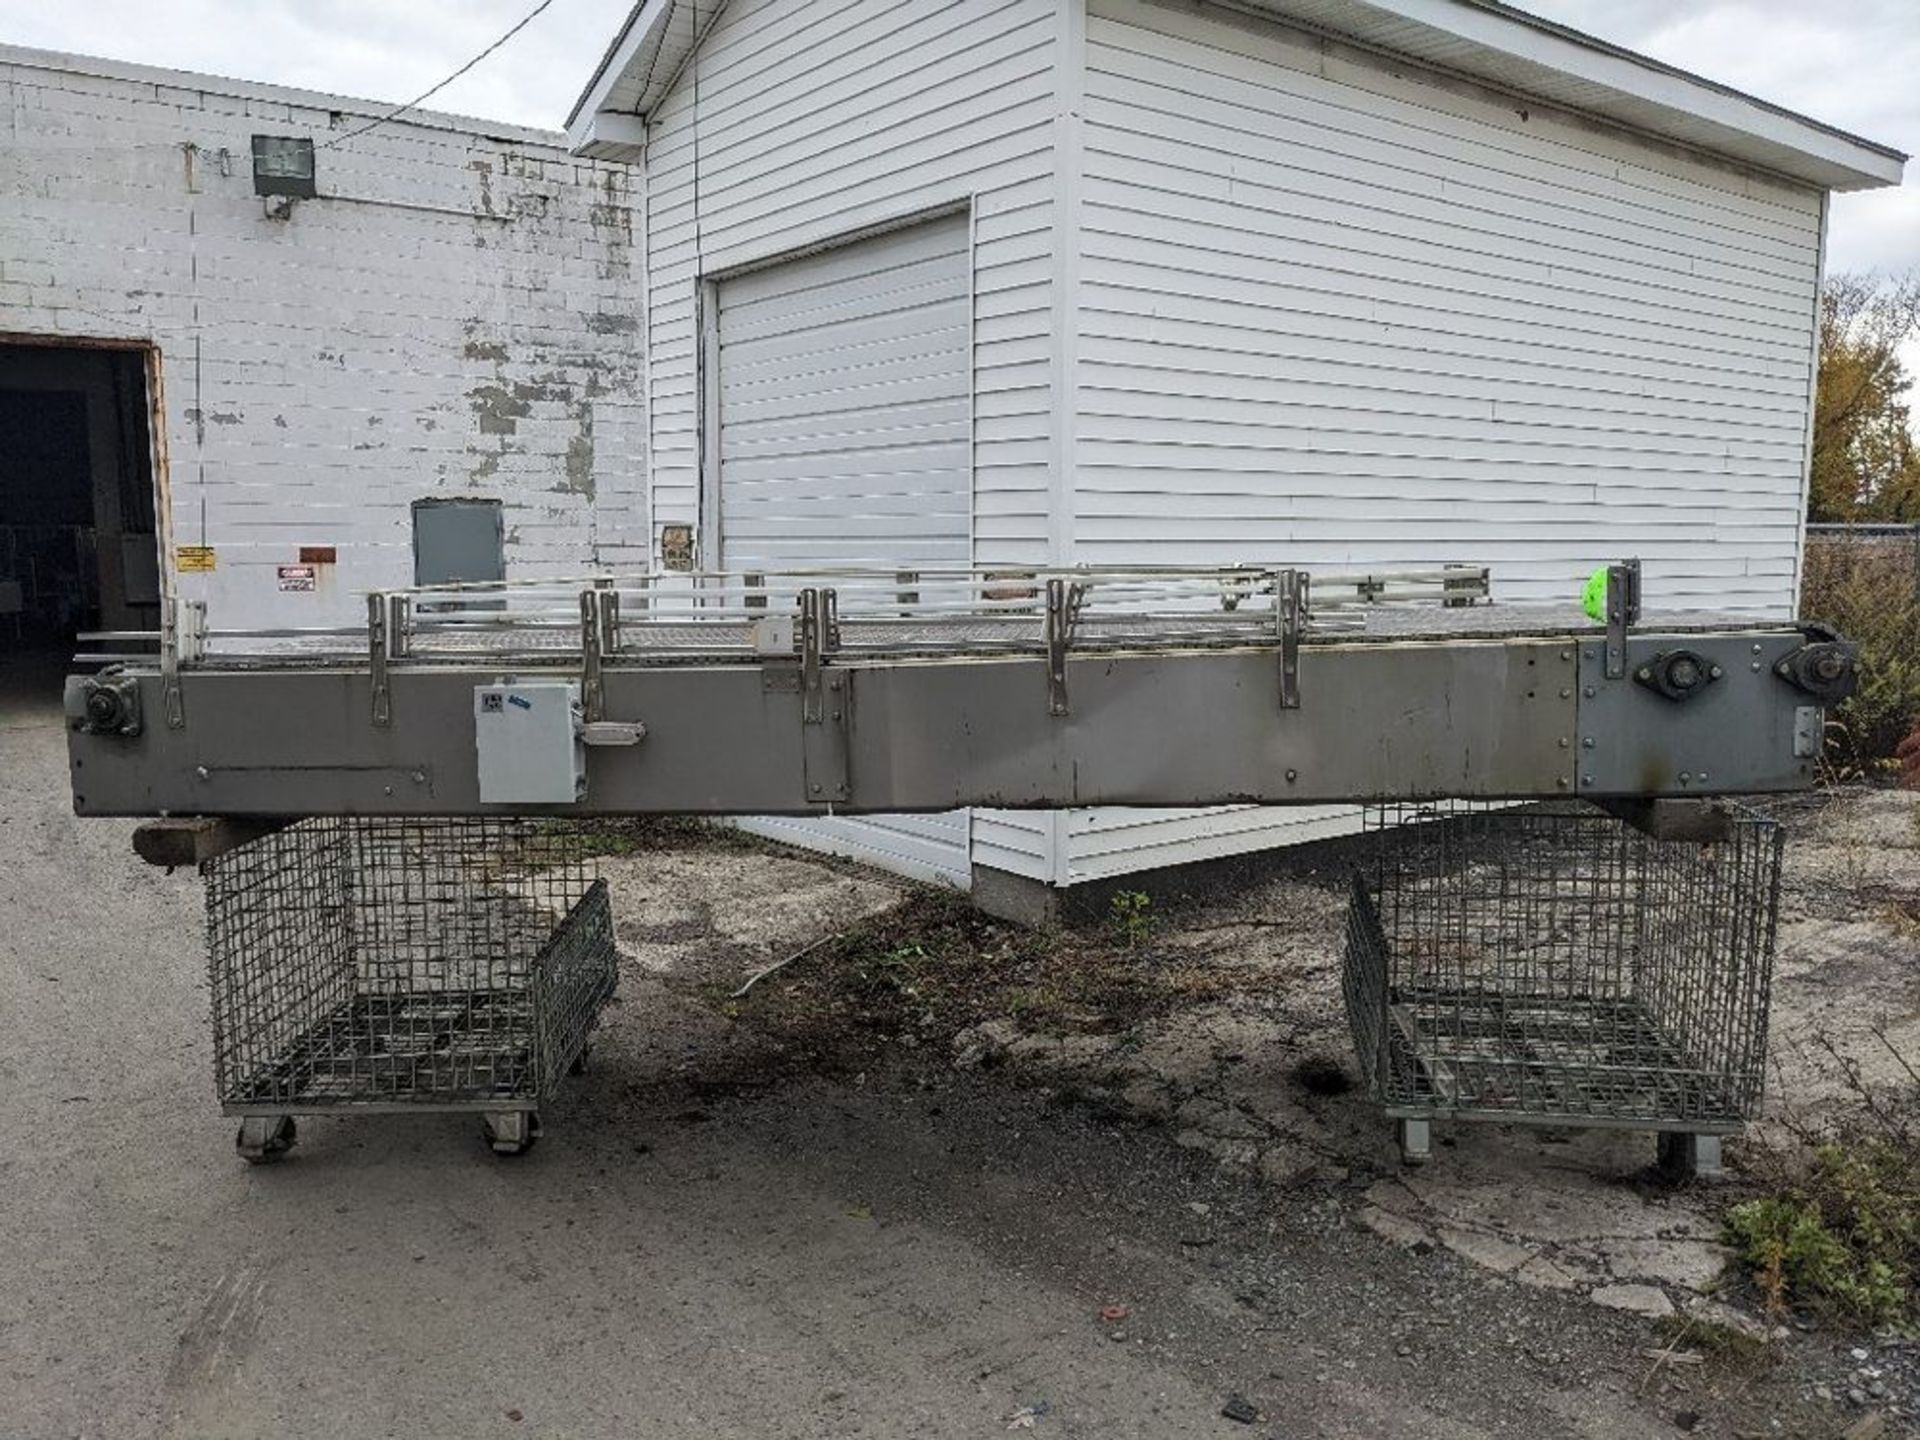 Qty (1) Large Container Accumulation Bed - Matt Top Conveyor - 156" L x 60" W, Model N/A, S/N N/A